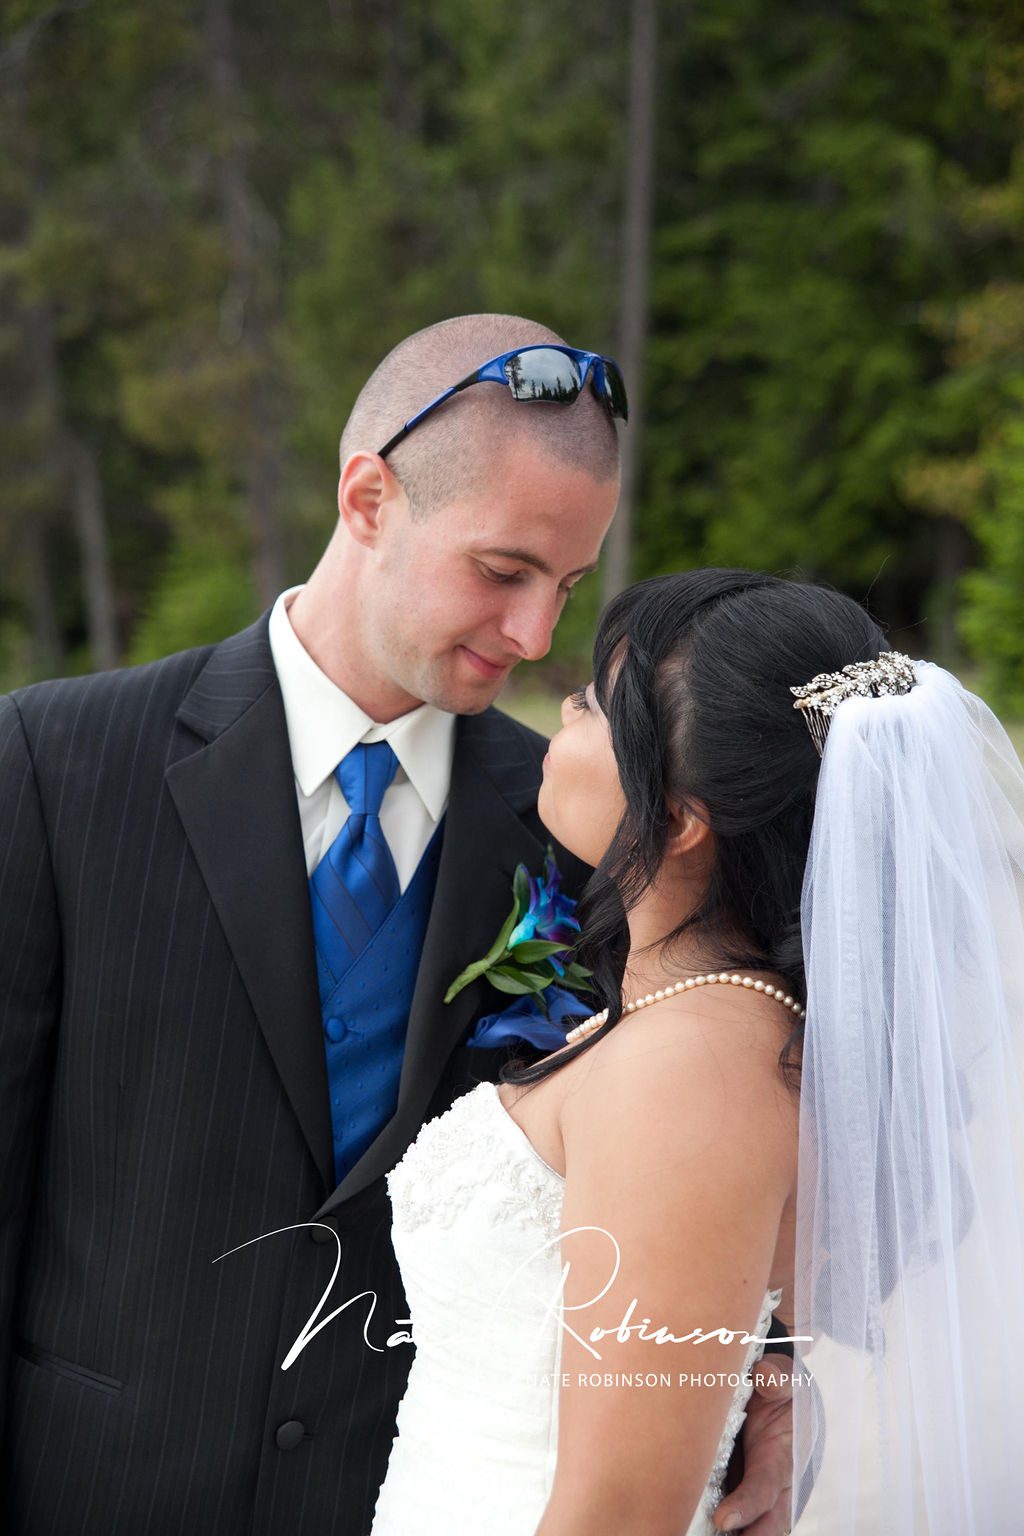 A groom wearing a blue vest and tie matching his boutonniere leans in for a kiss with his bride in a white lace dress and veil at a schweitzer wedding